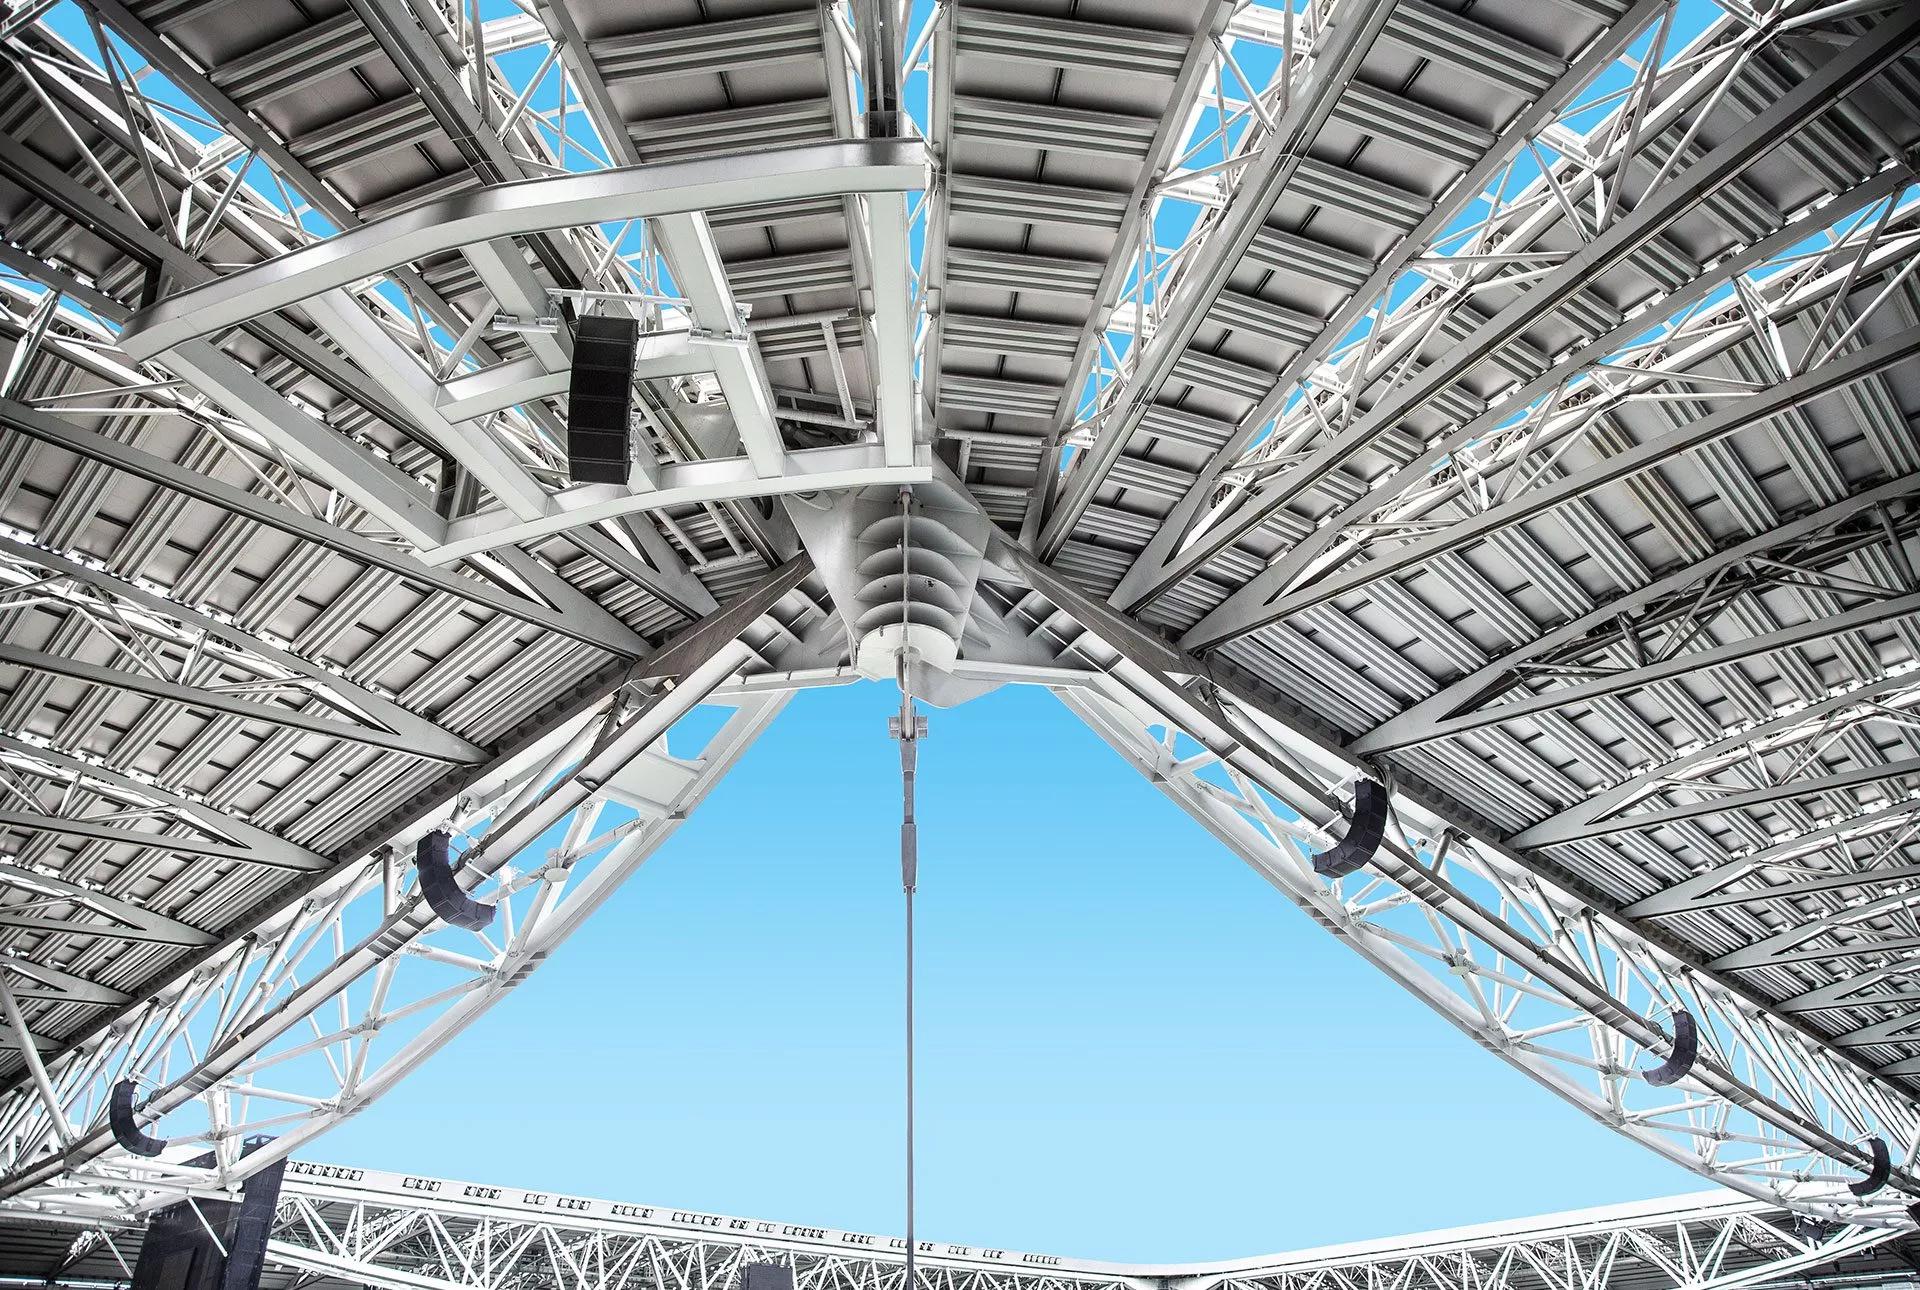 Allianz stadium ceiling equipped with Bose Professional loudspeakers